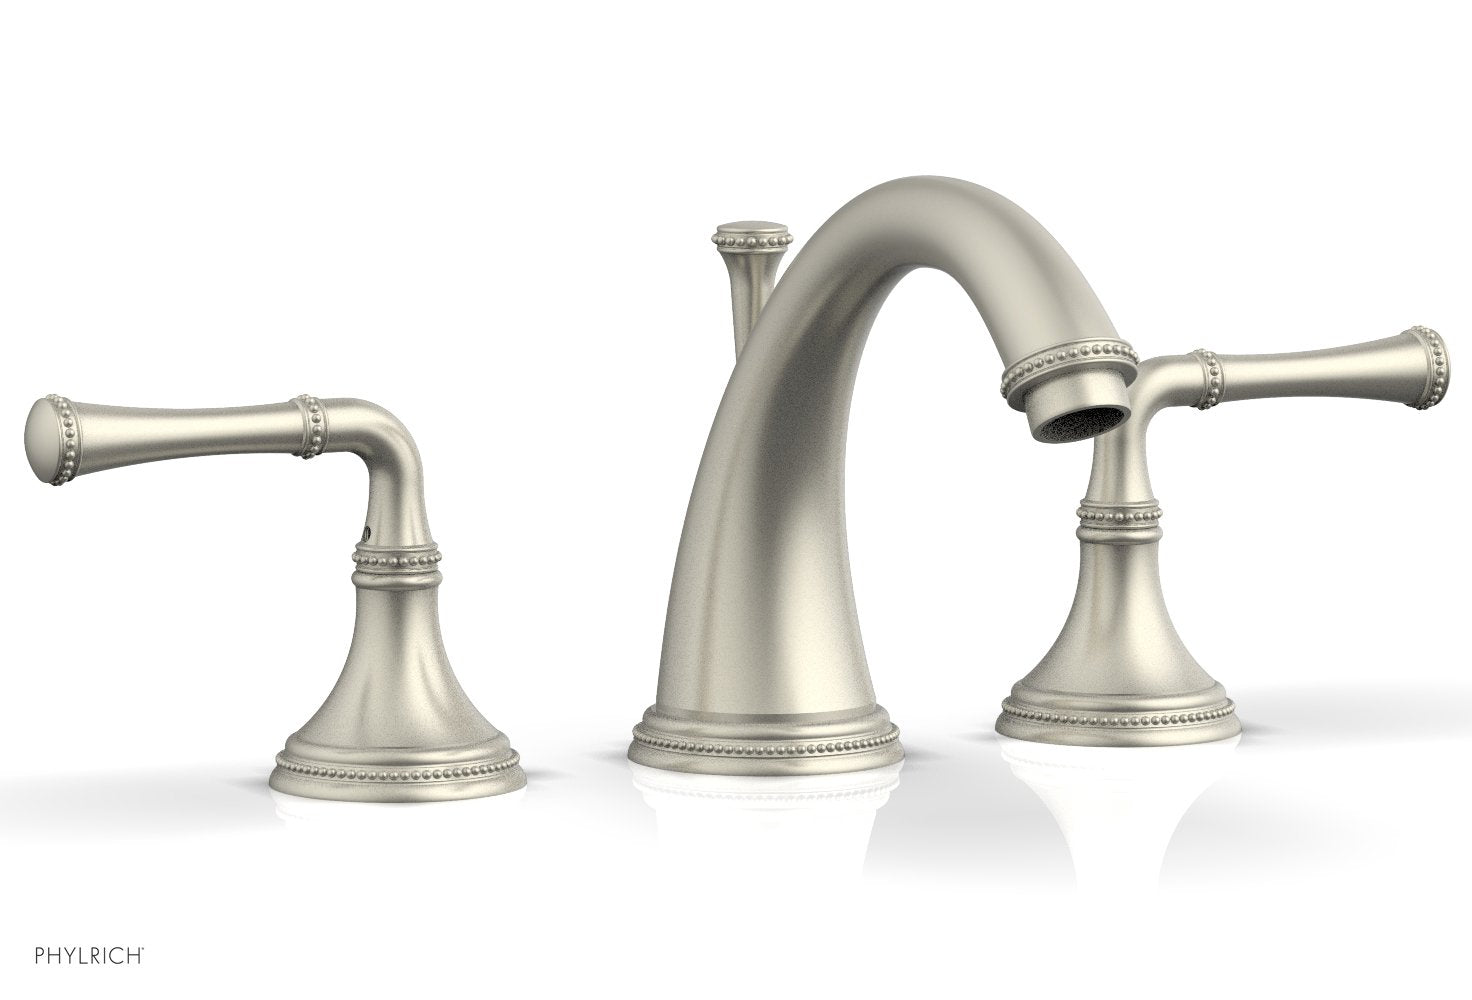 Phylrich BEADED Widespread Faucet Lever Handles